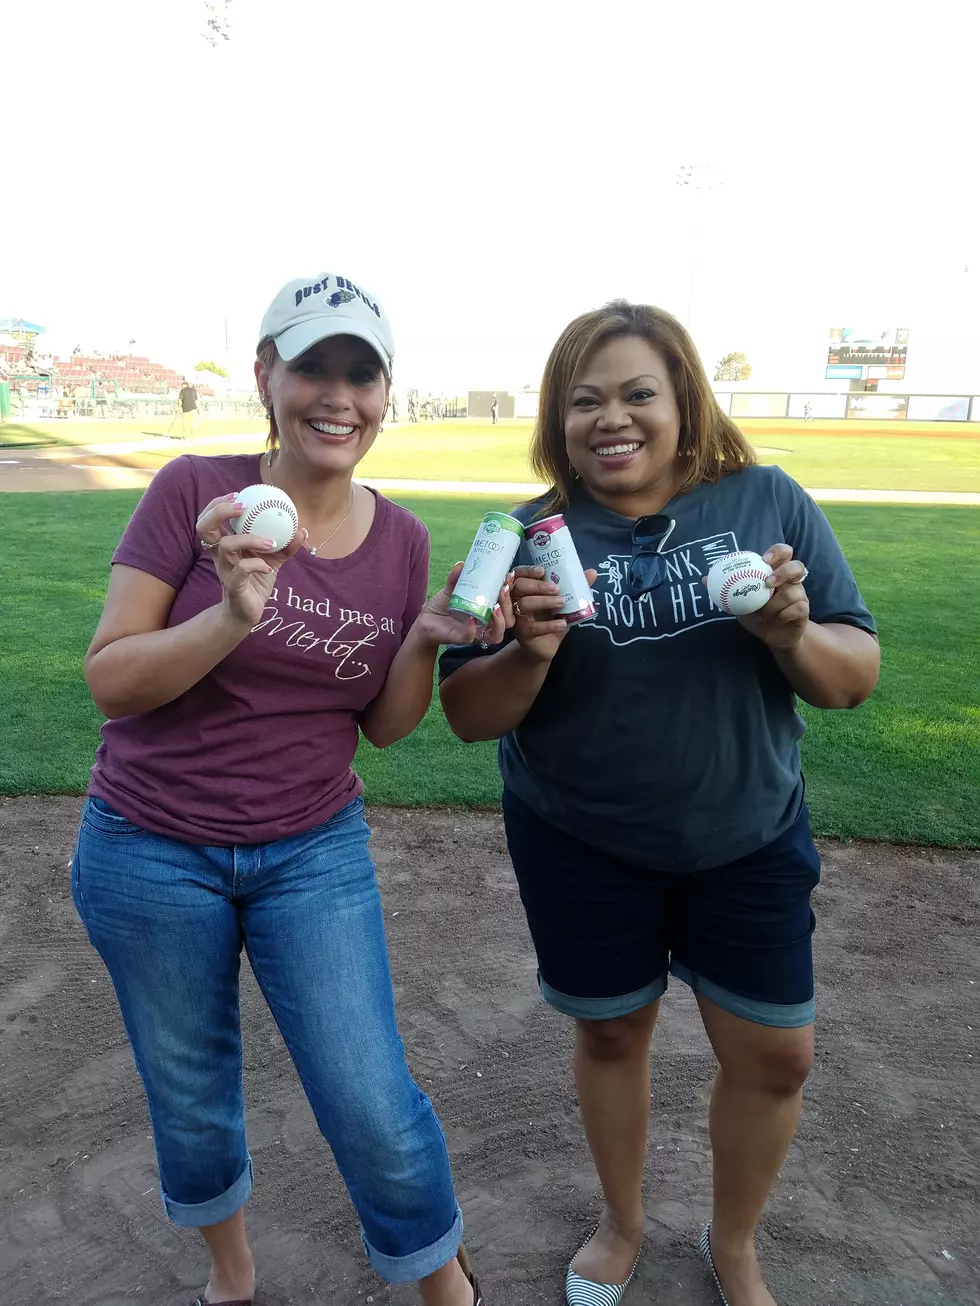 Who Knew Wine in a Can at a Baseball Game?